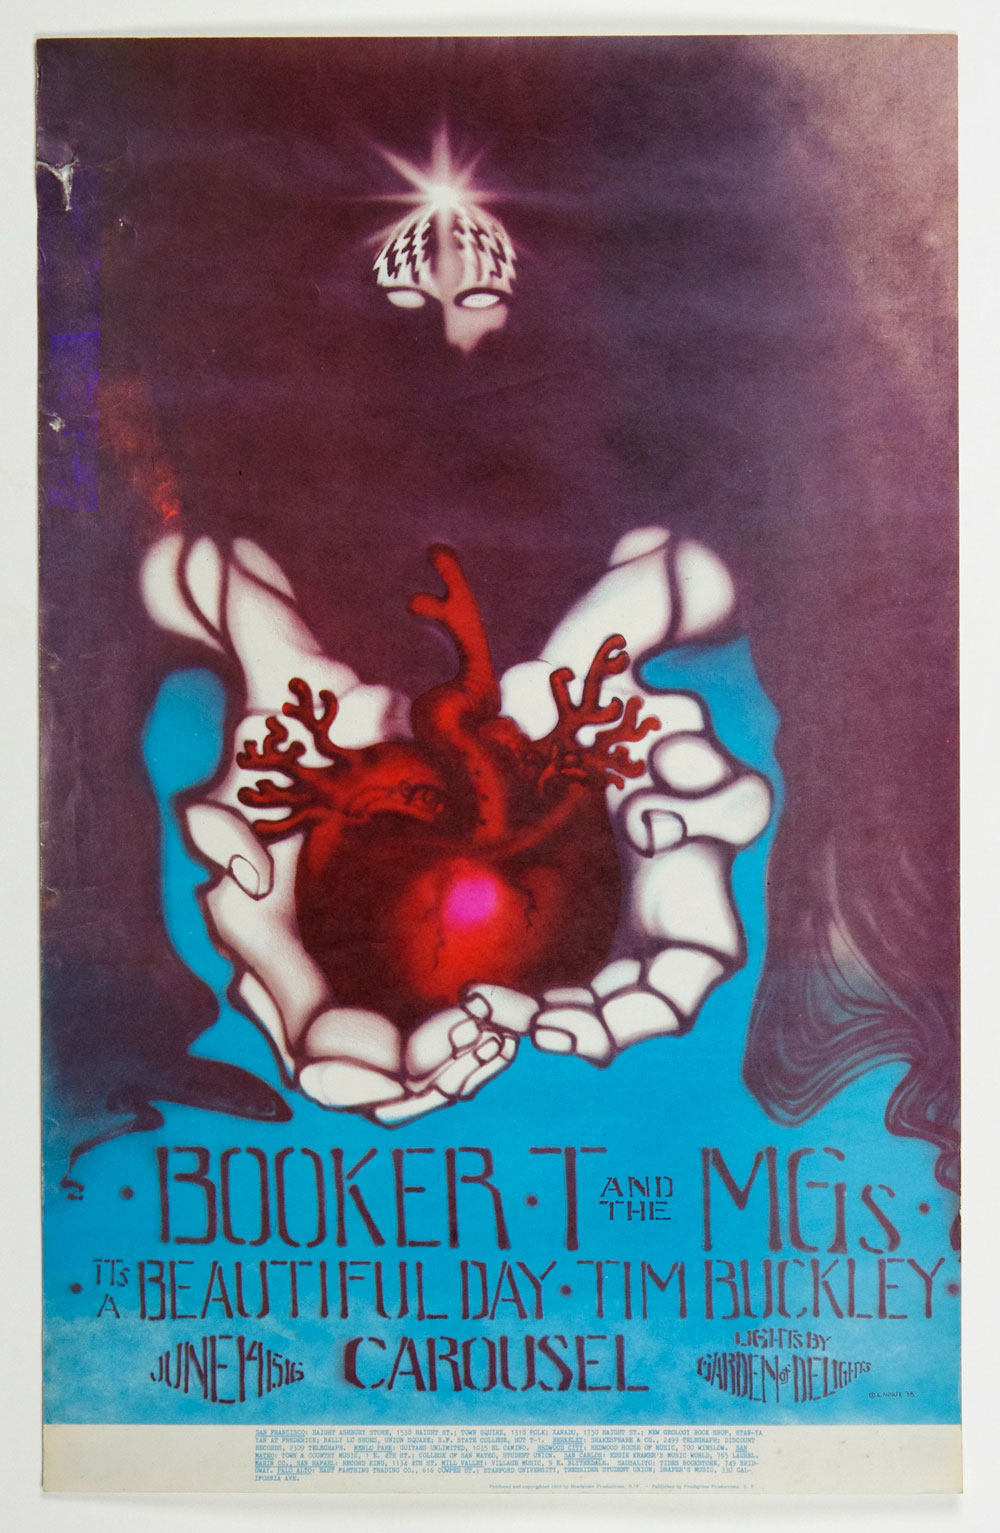 Carousel Ballroom Poster 1968 Jun 14 It's Beautiful Day Booker T and the MG's